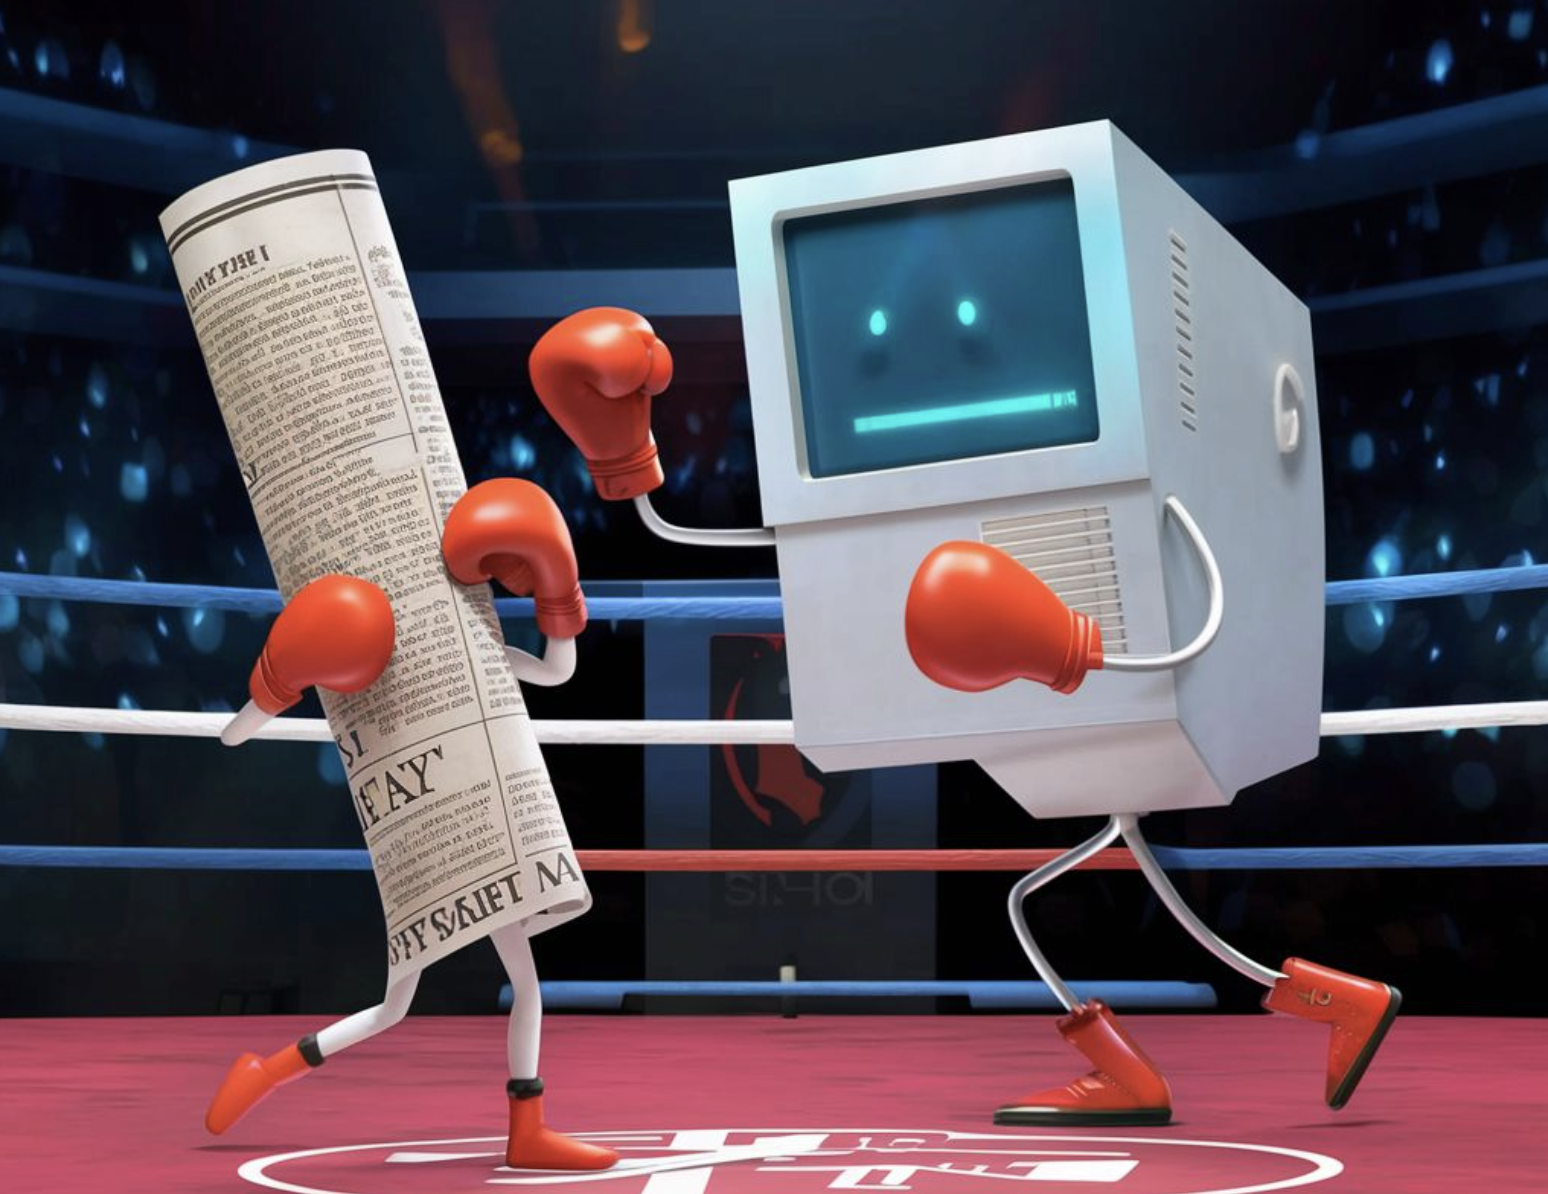 Ideogram. “A newspaper in a boxing match with technology.”